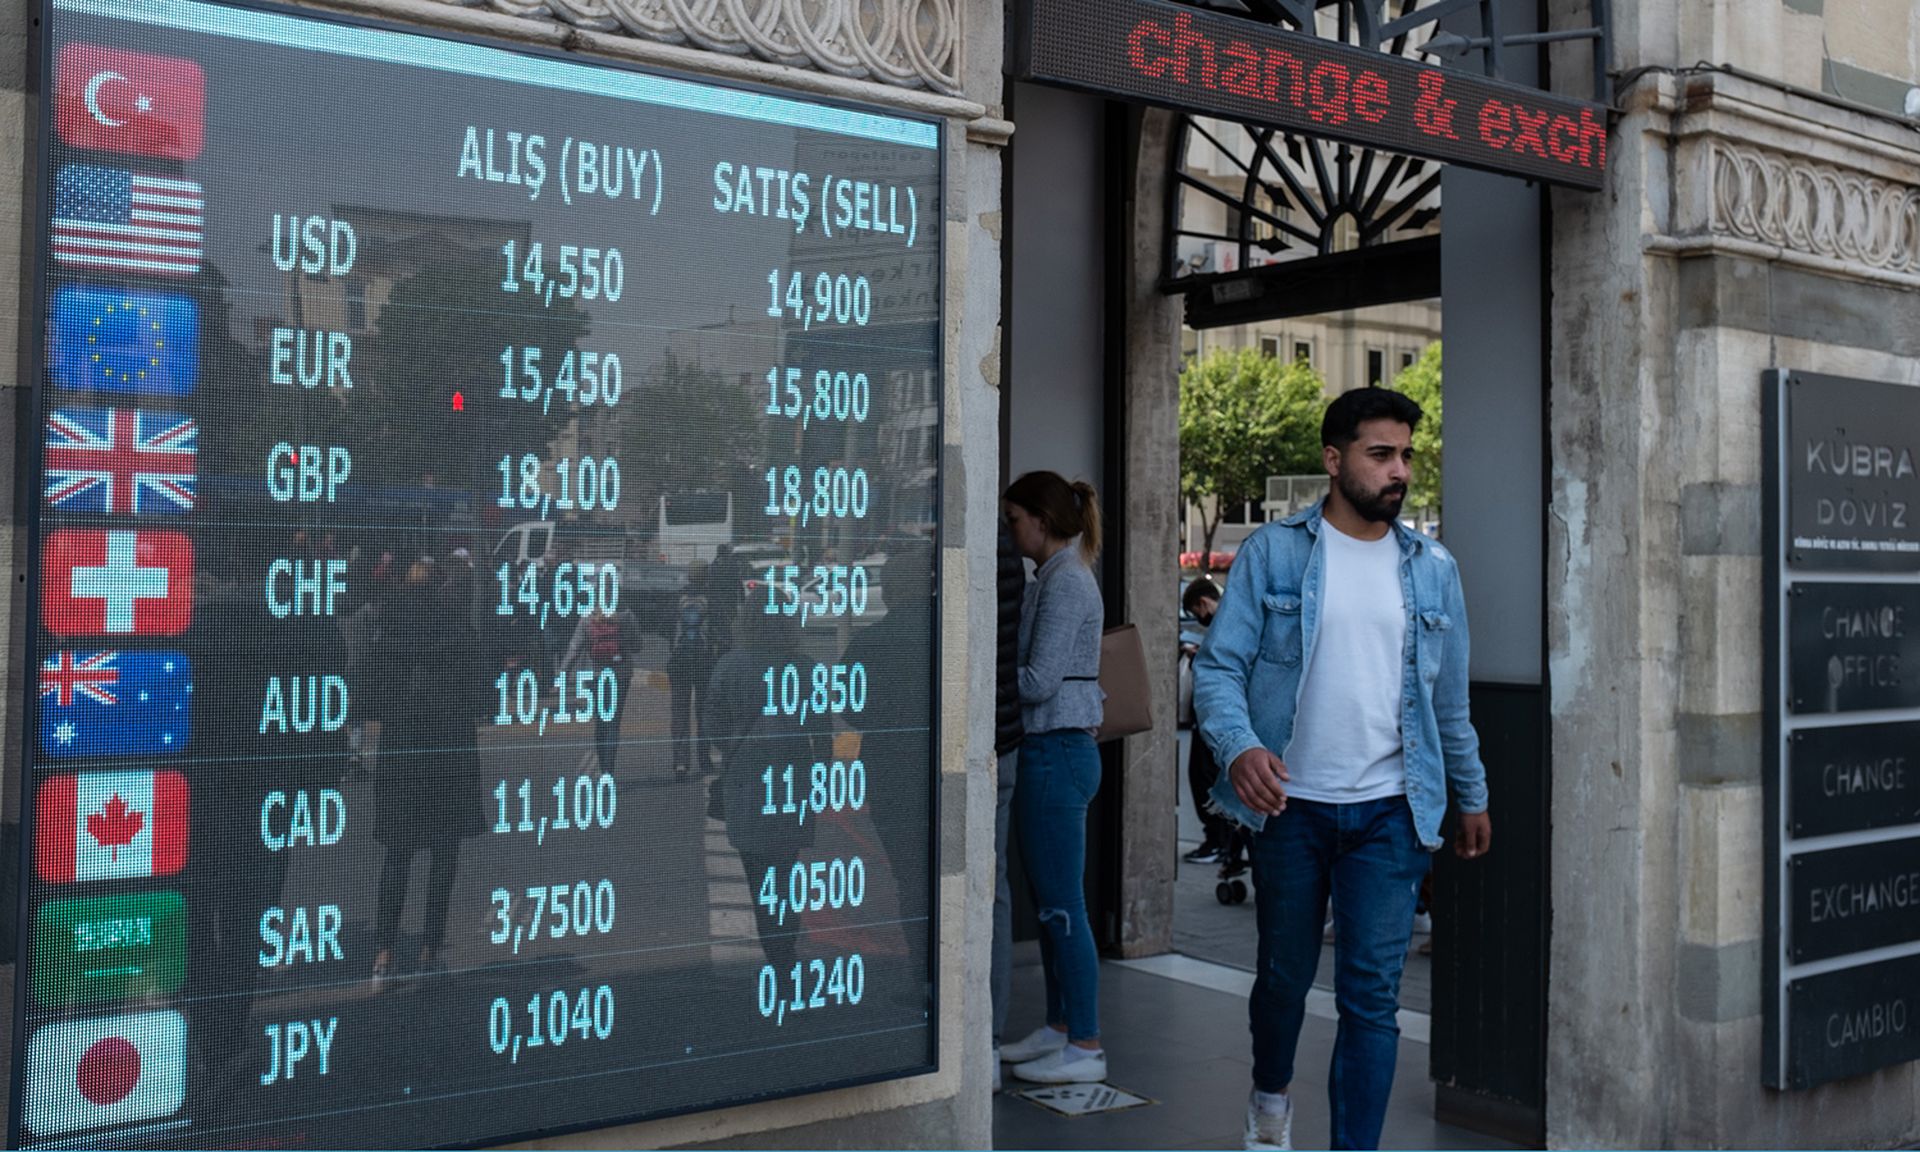 A man walks past a currency exchange office on May 5, 2022, in Istanbul. (Photo by Burak Kara/Getty Images)